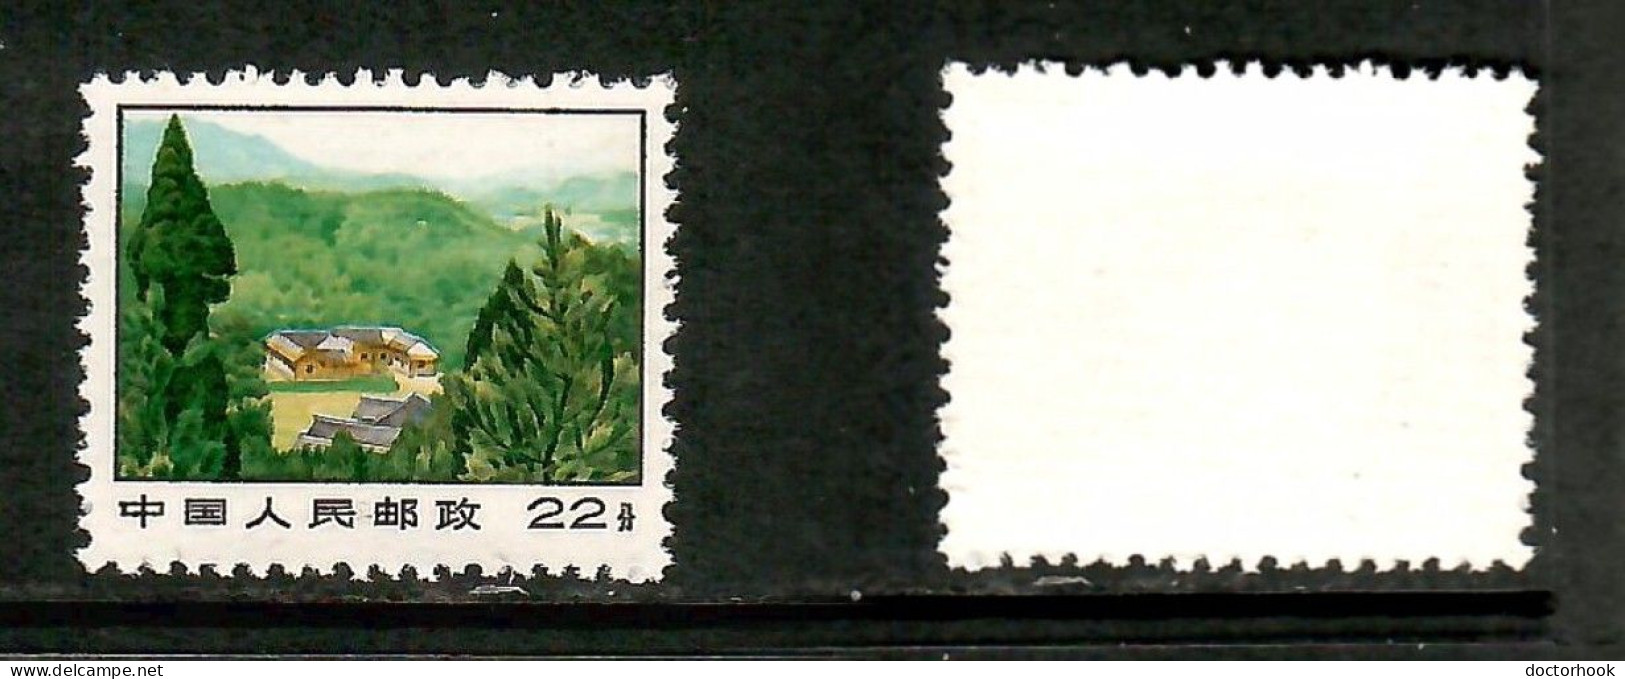 PEOPLES REPUBLIC Of CHINA   Scott # 1032* MINT NO GUM AS ISSUED (CONDITION AS PER SCAN) (Stamp Scan # 1012-8) - Ongebruikt